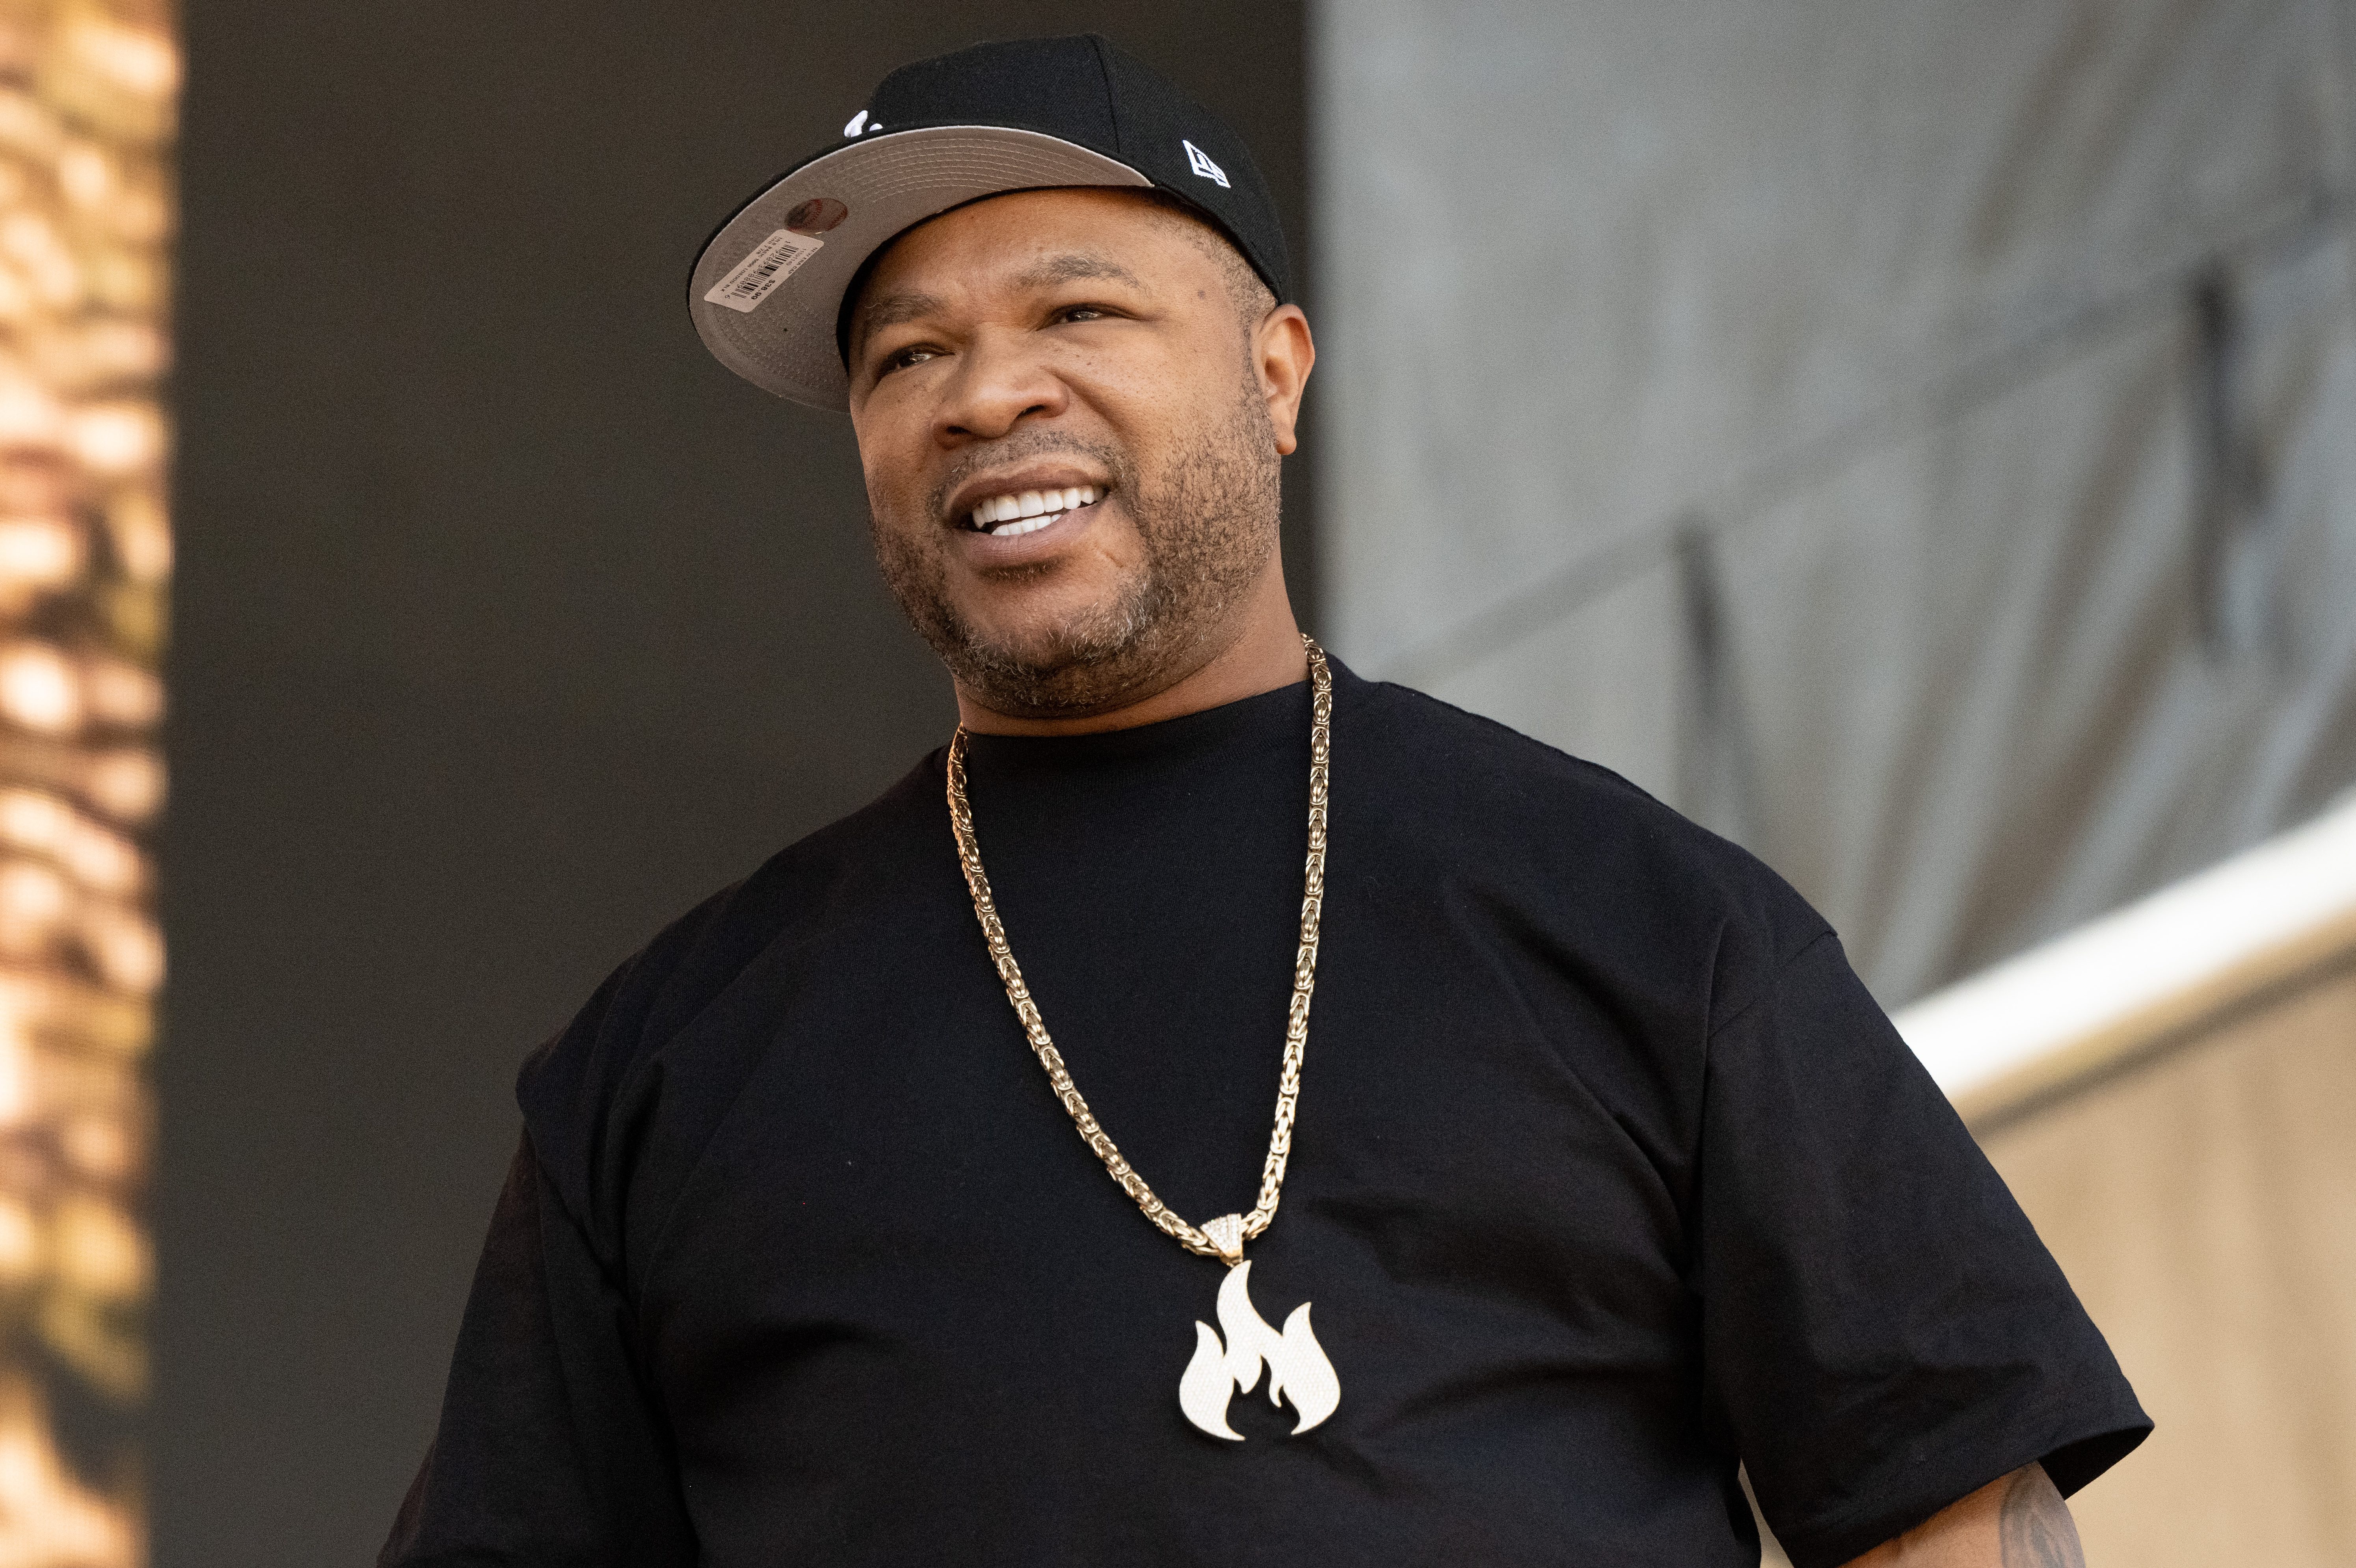 Xzibit performs onstage during the Once Upon a Time in LA Music Festival.